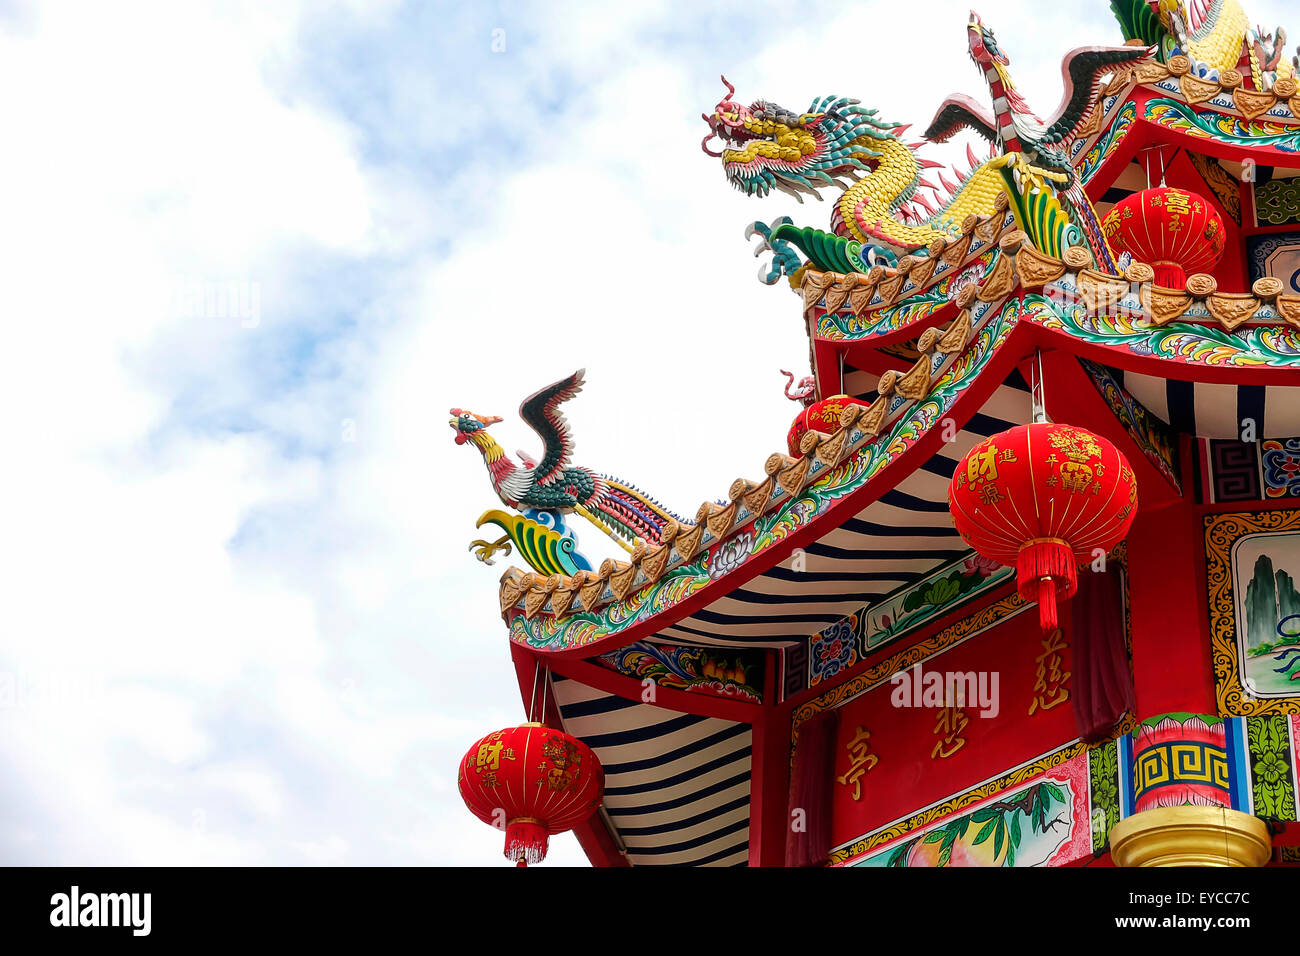 Chinese Dragon that we can see at the shrine in Asia. Stock Photo